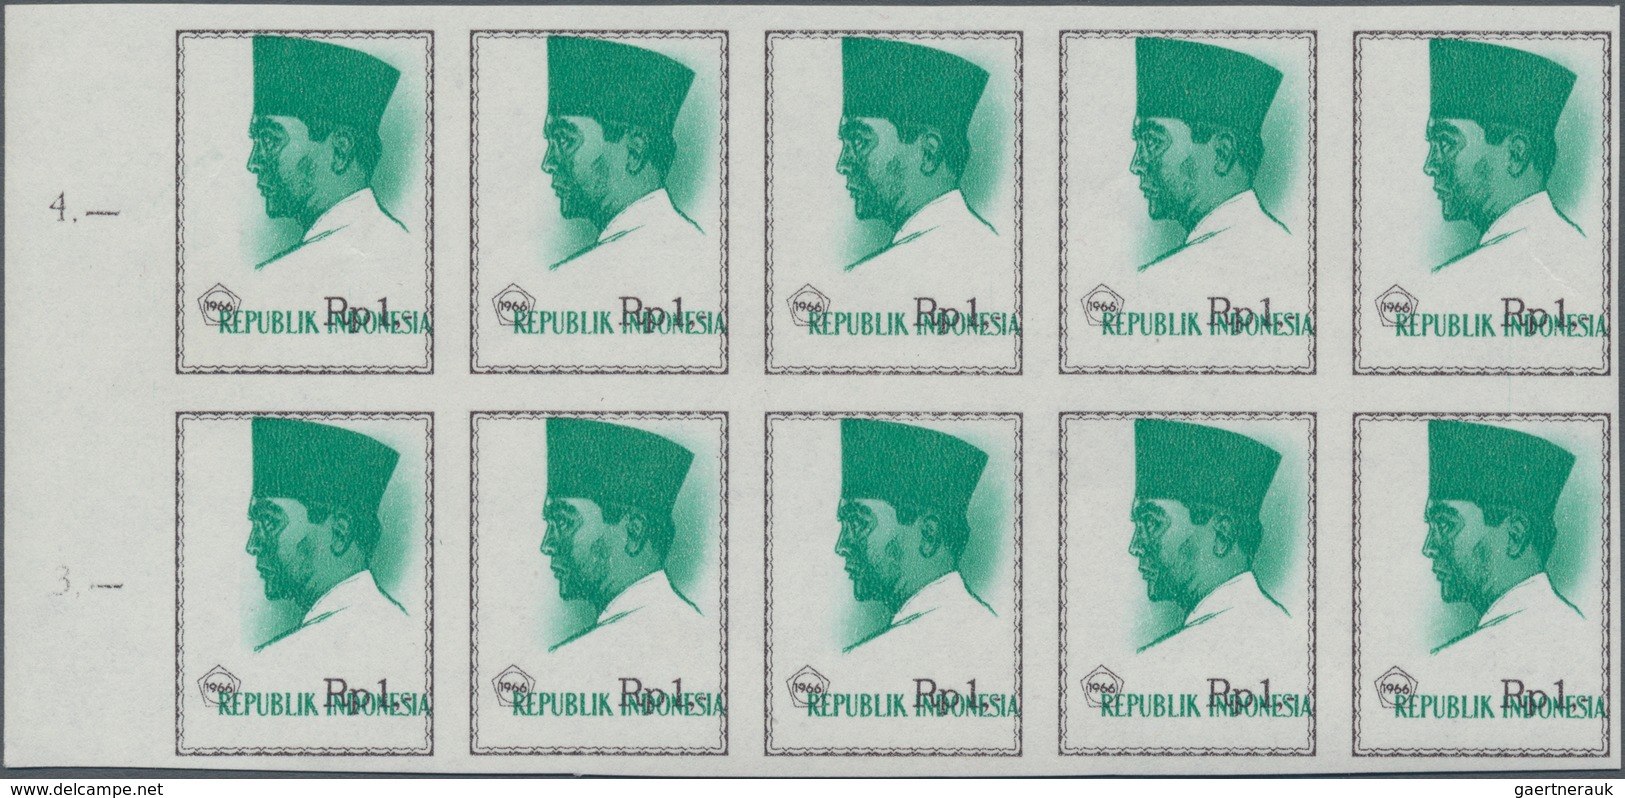 Indonesien: 1966, President Sukarno 1rp. Brown/green Lot With 30 IMPERFORATE Stamps In Three Blocks - Indonesien